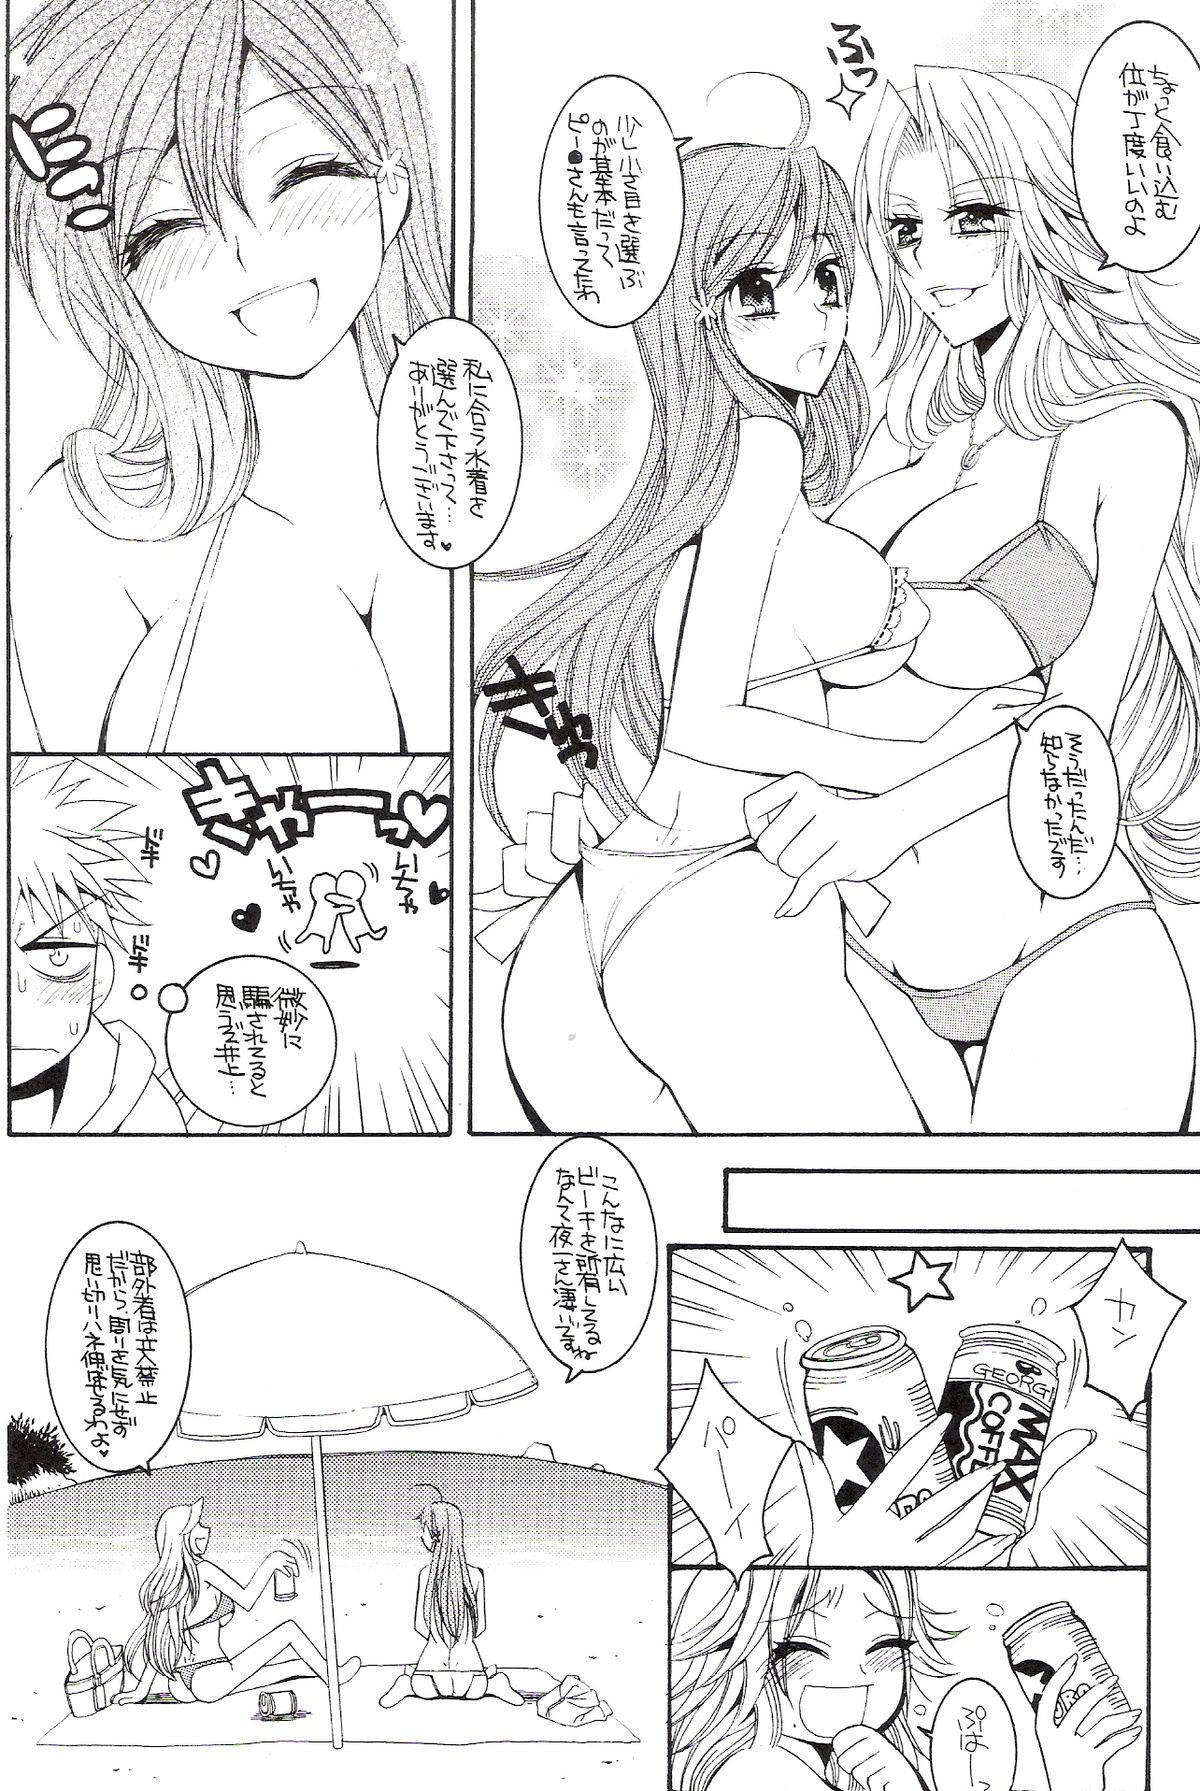 Babysitter CHICK CHICK CHICK - Bleach Hermana - Page 5